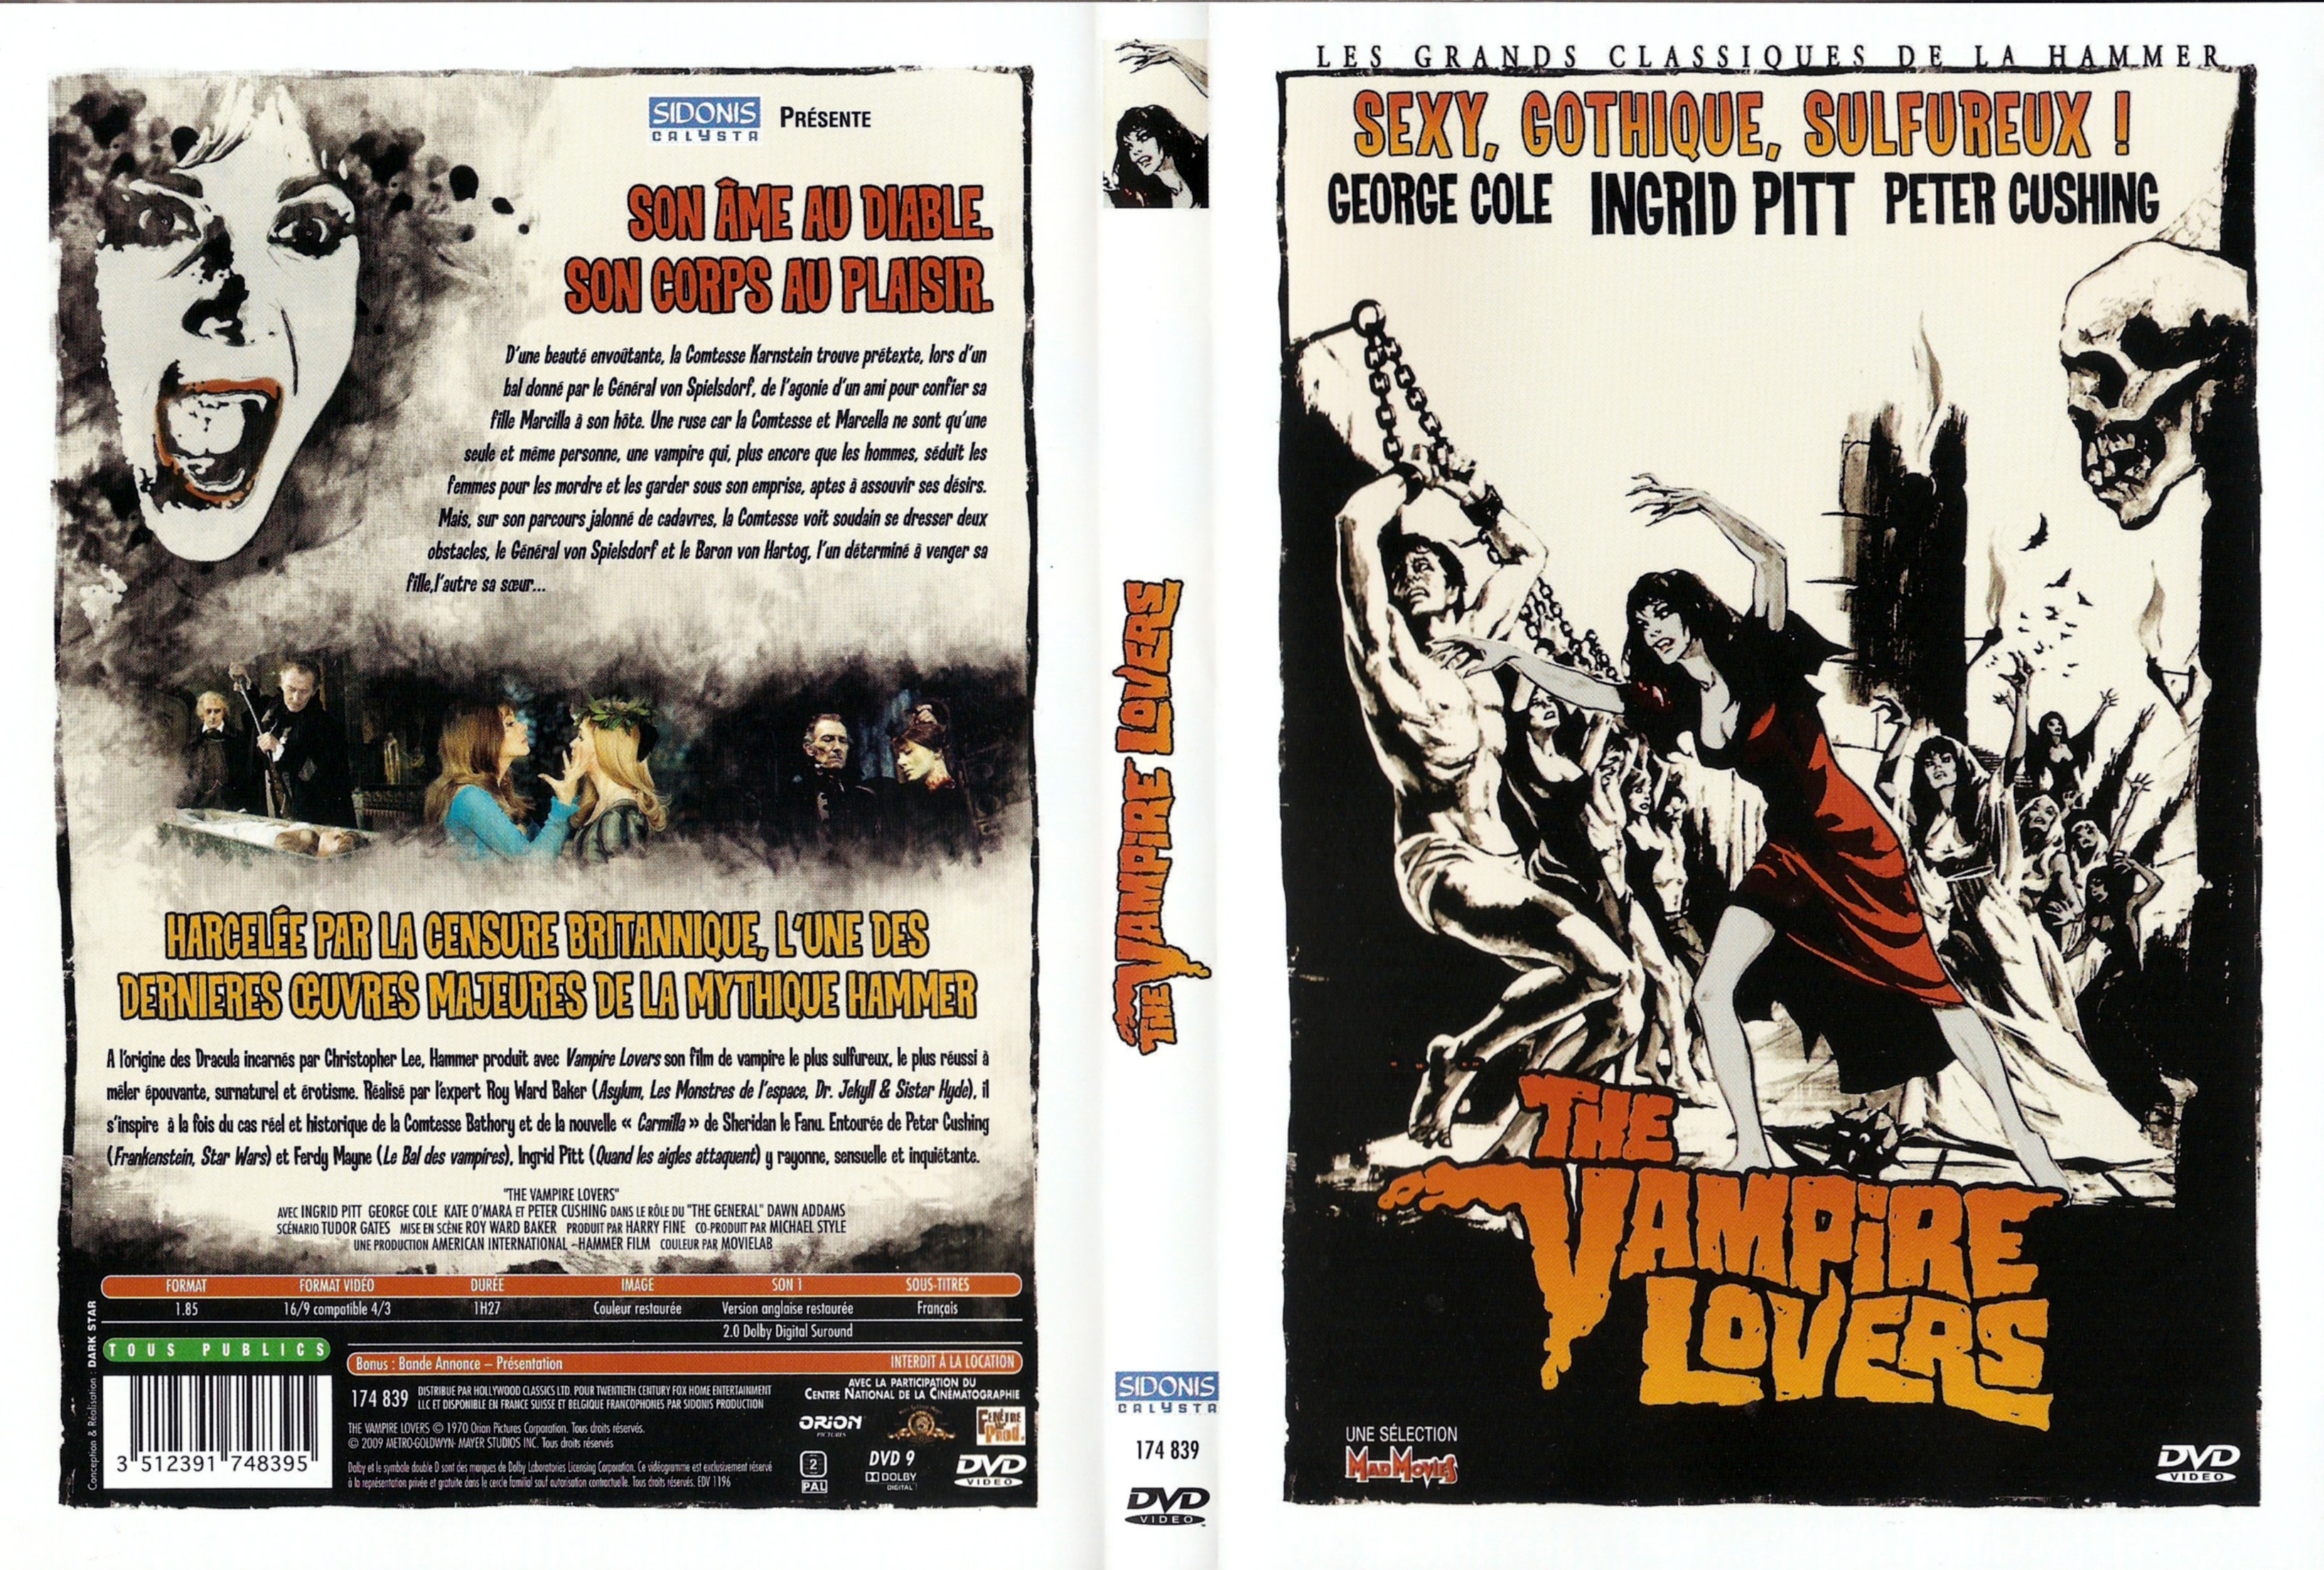 Jaquette DVD The vampire lovers